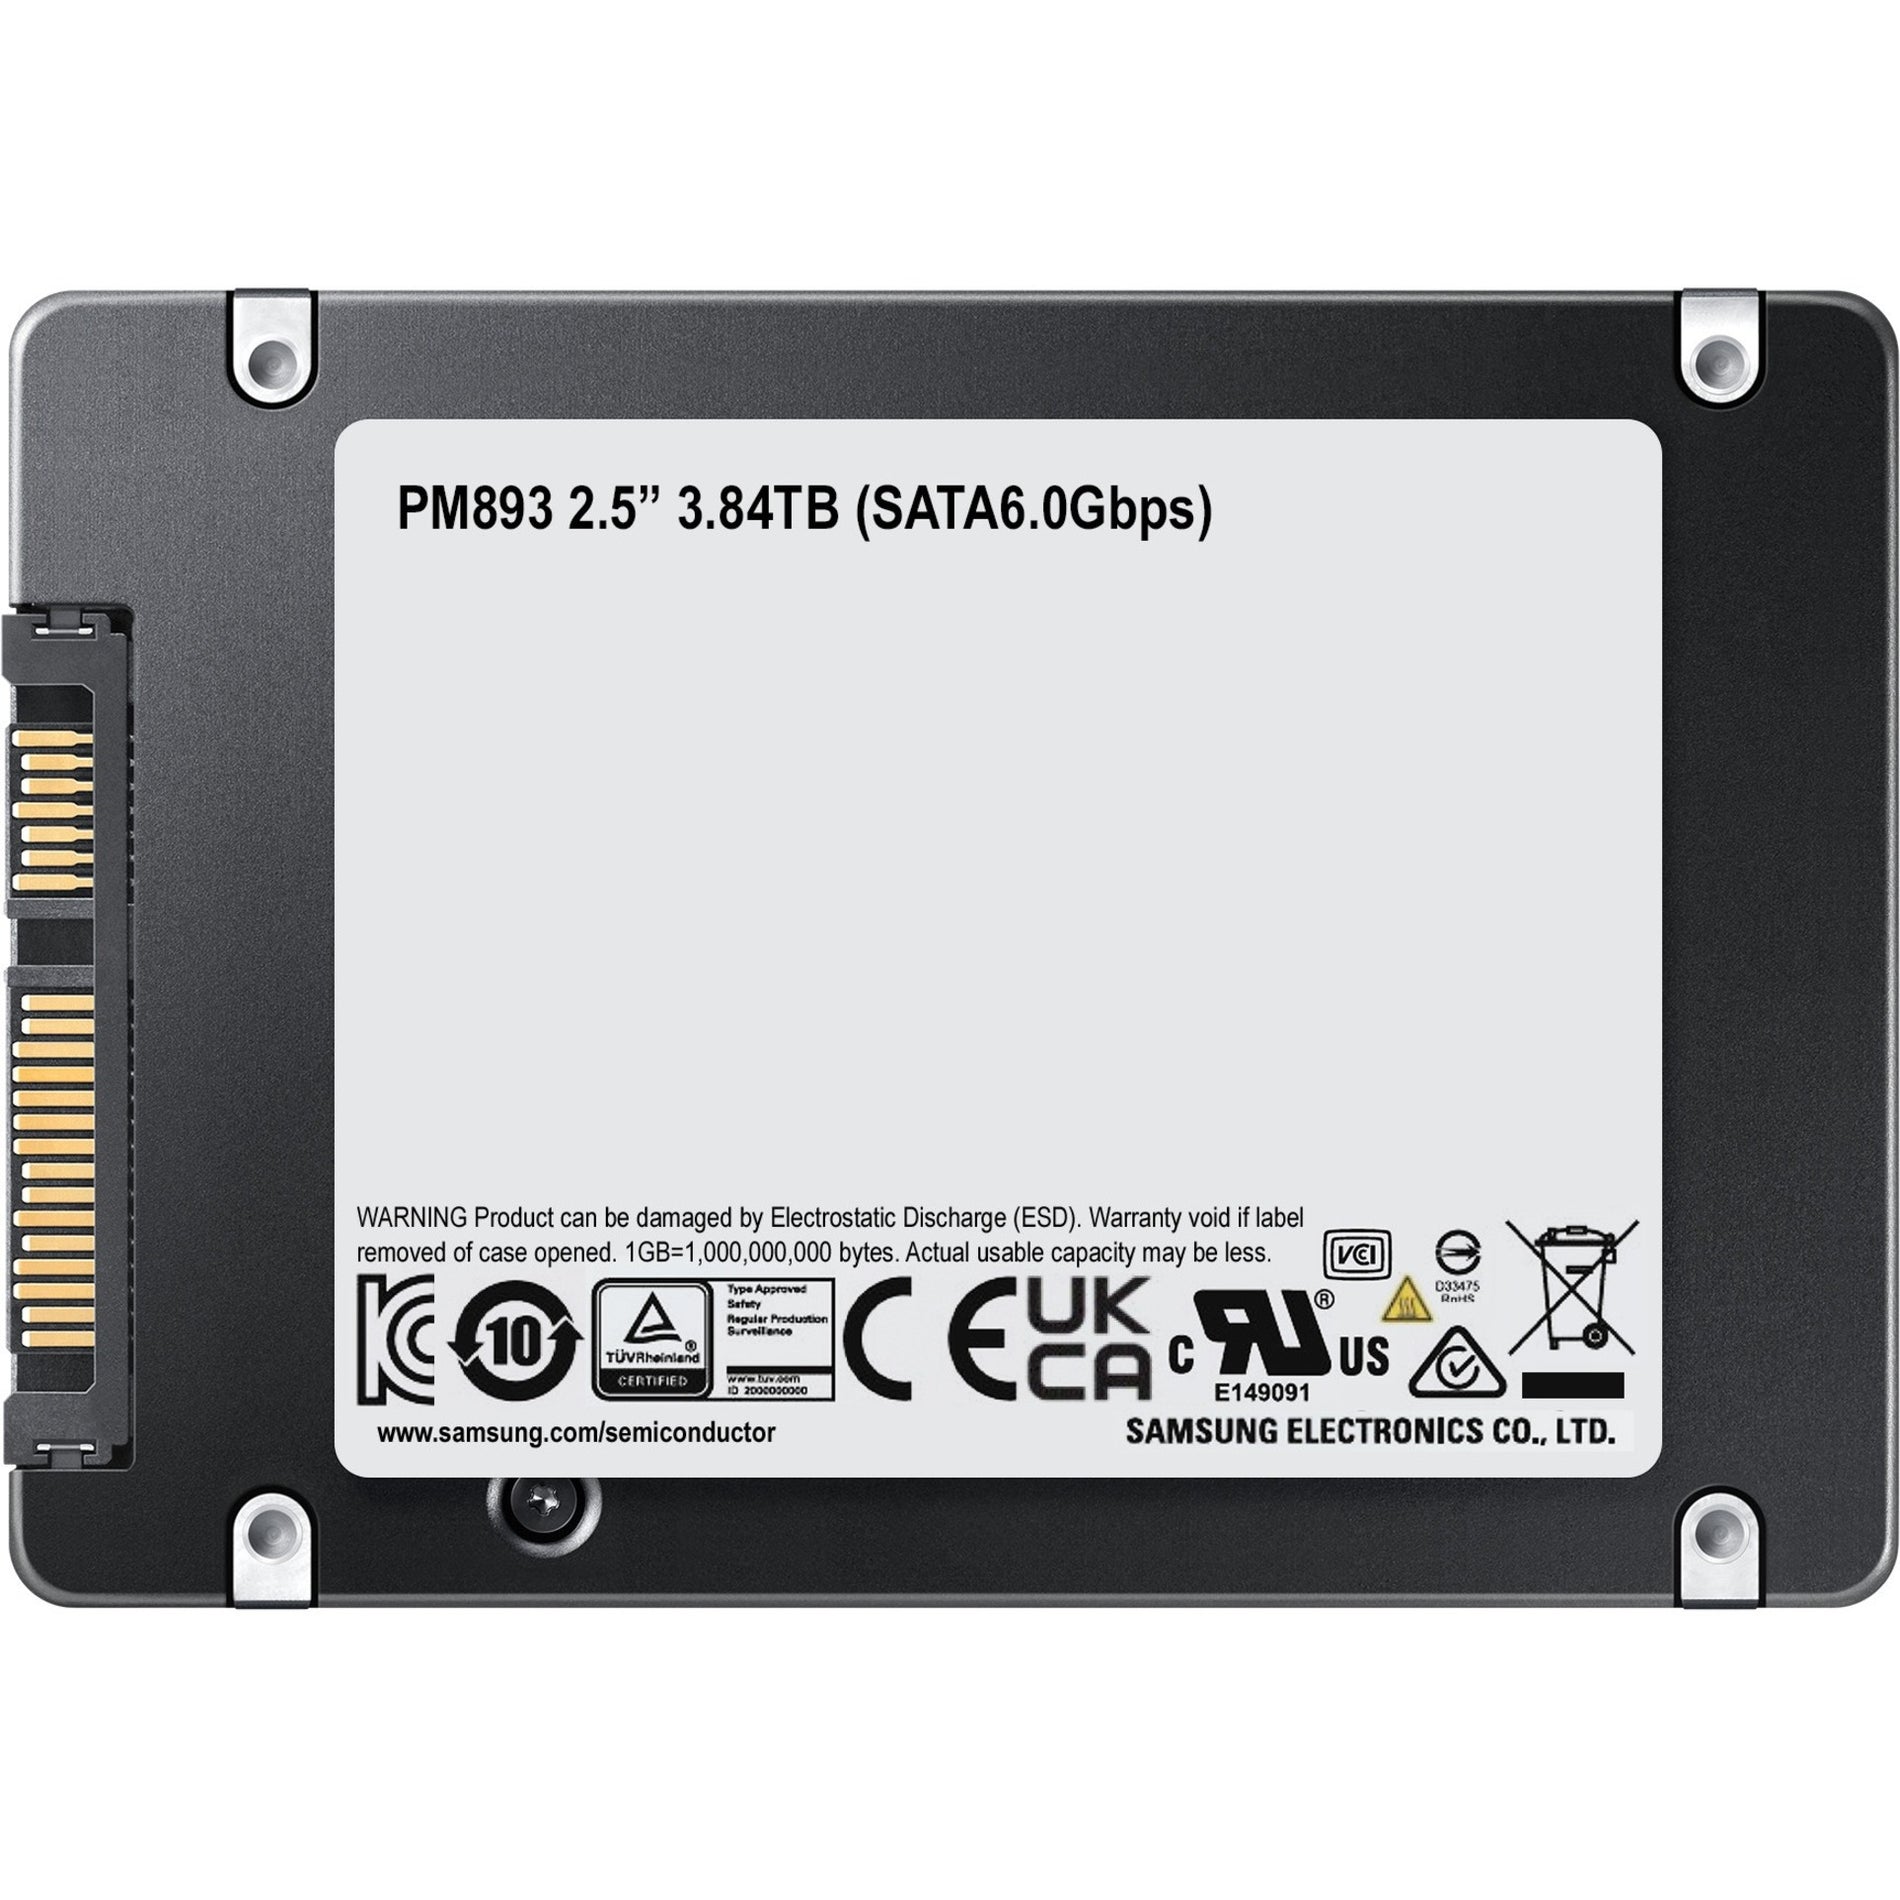 Samsung MZ-7L33T800 PM893 Solid State Drive, 3.84TB SATA6GB/S, High Performance and Data Security